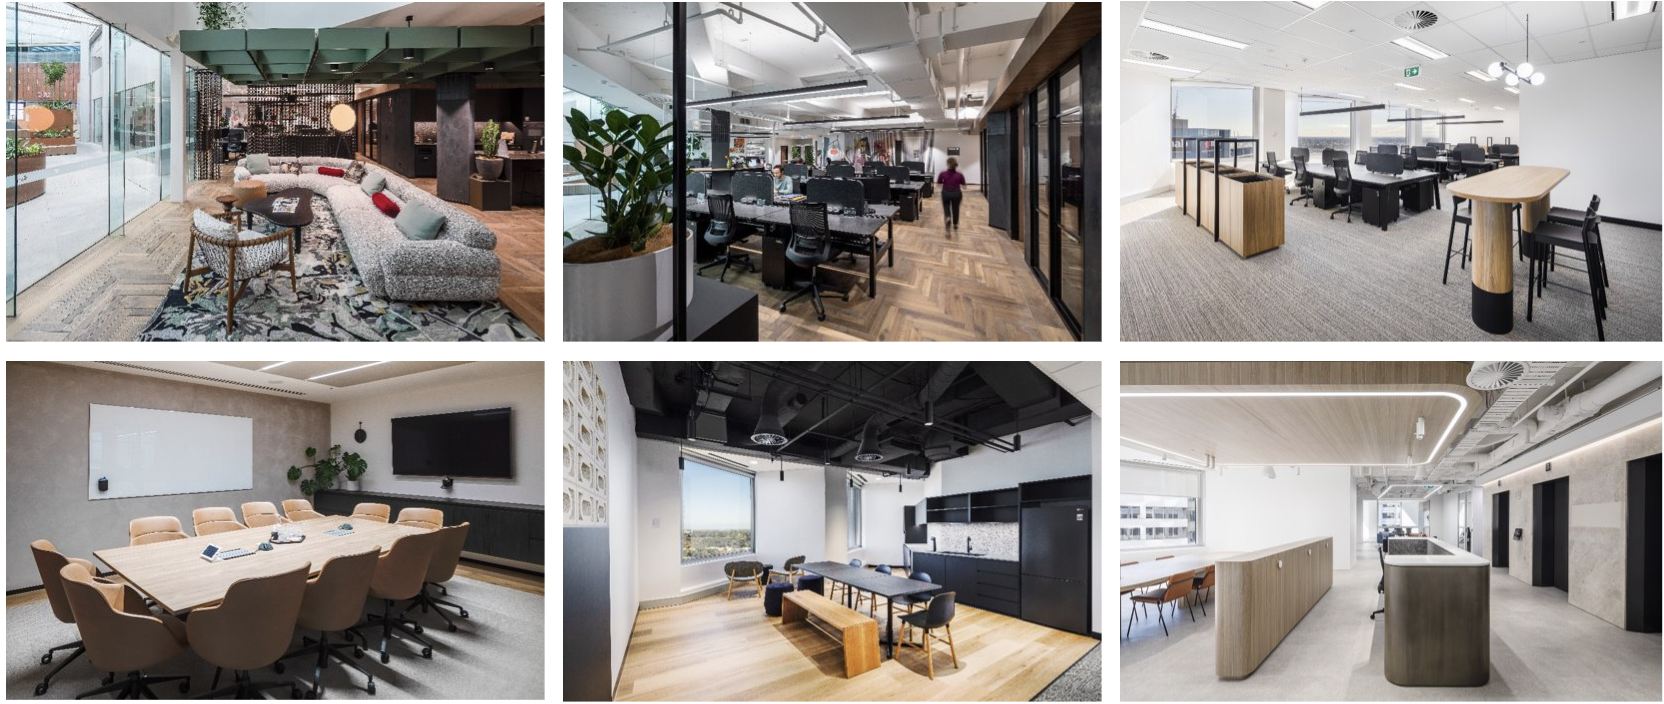 The office space inside Allendale Square. Source: Centuria Capital